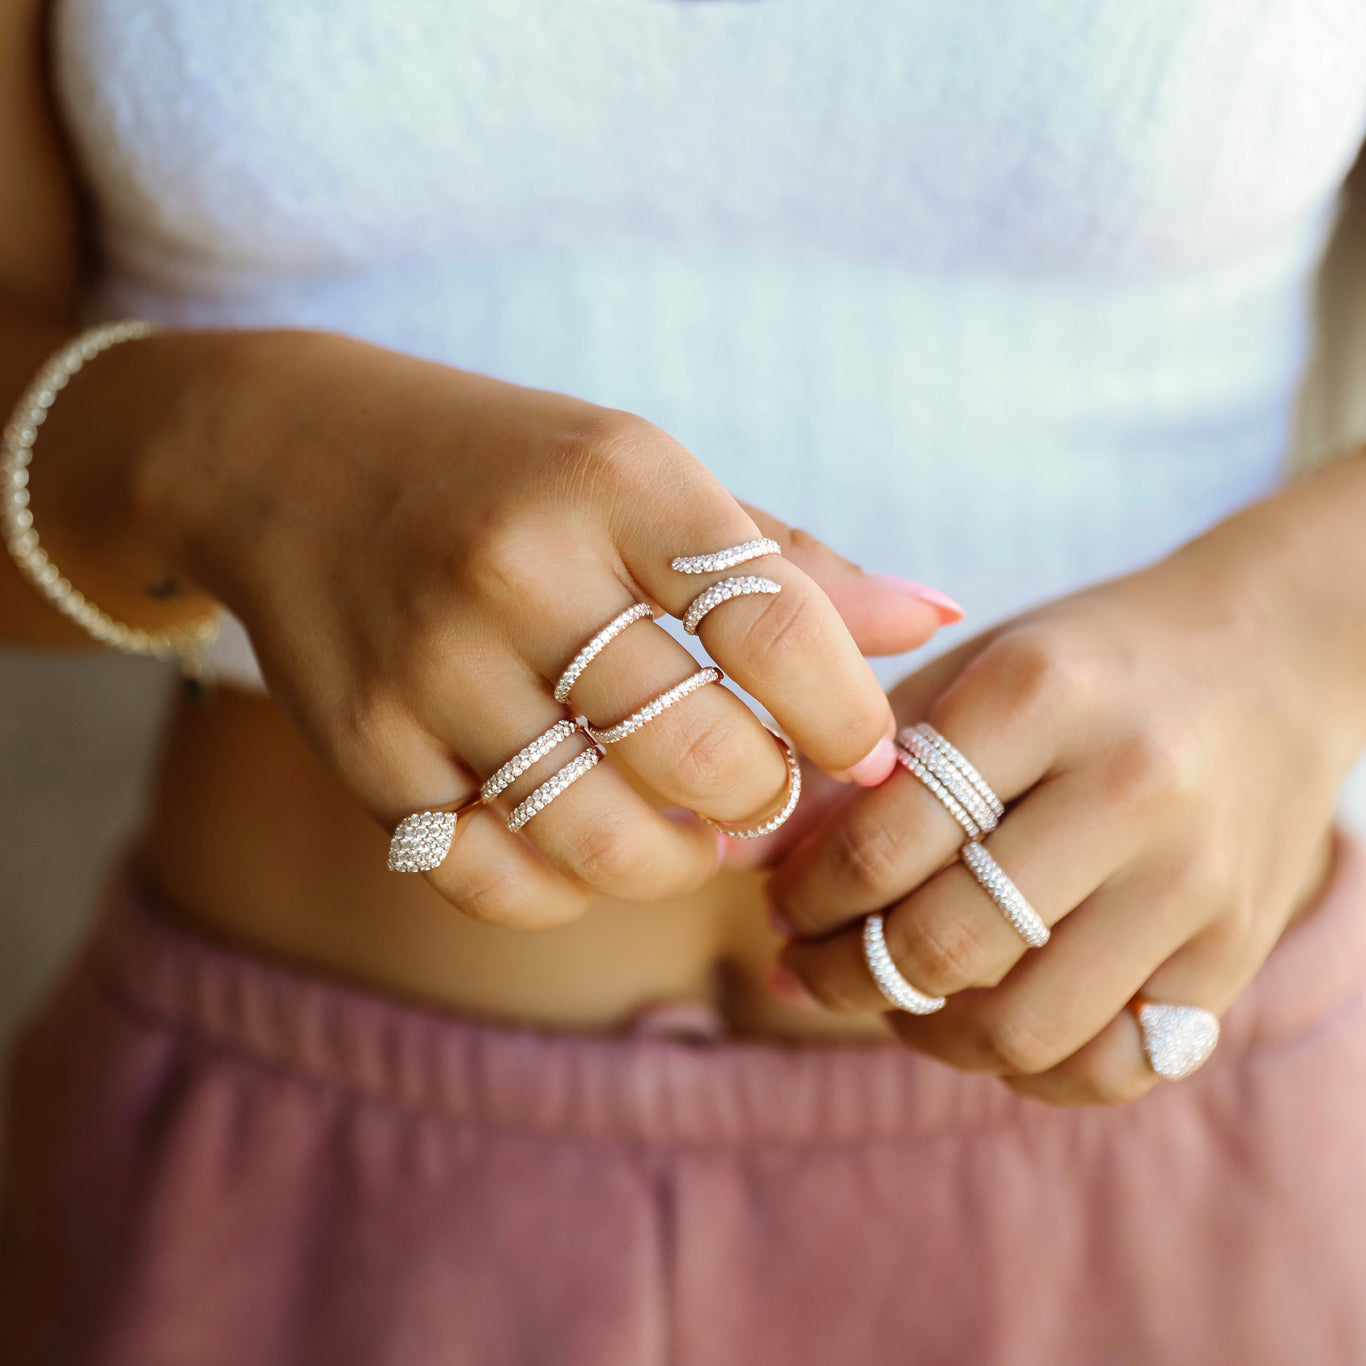 Gemma Pinky Ring shown with the Double Dome Band, Arabesque Ring, and Viper Ring on the right hand.